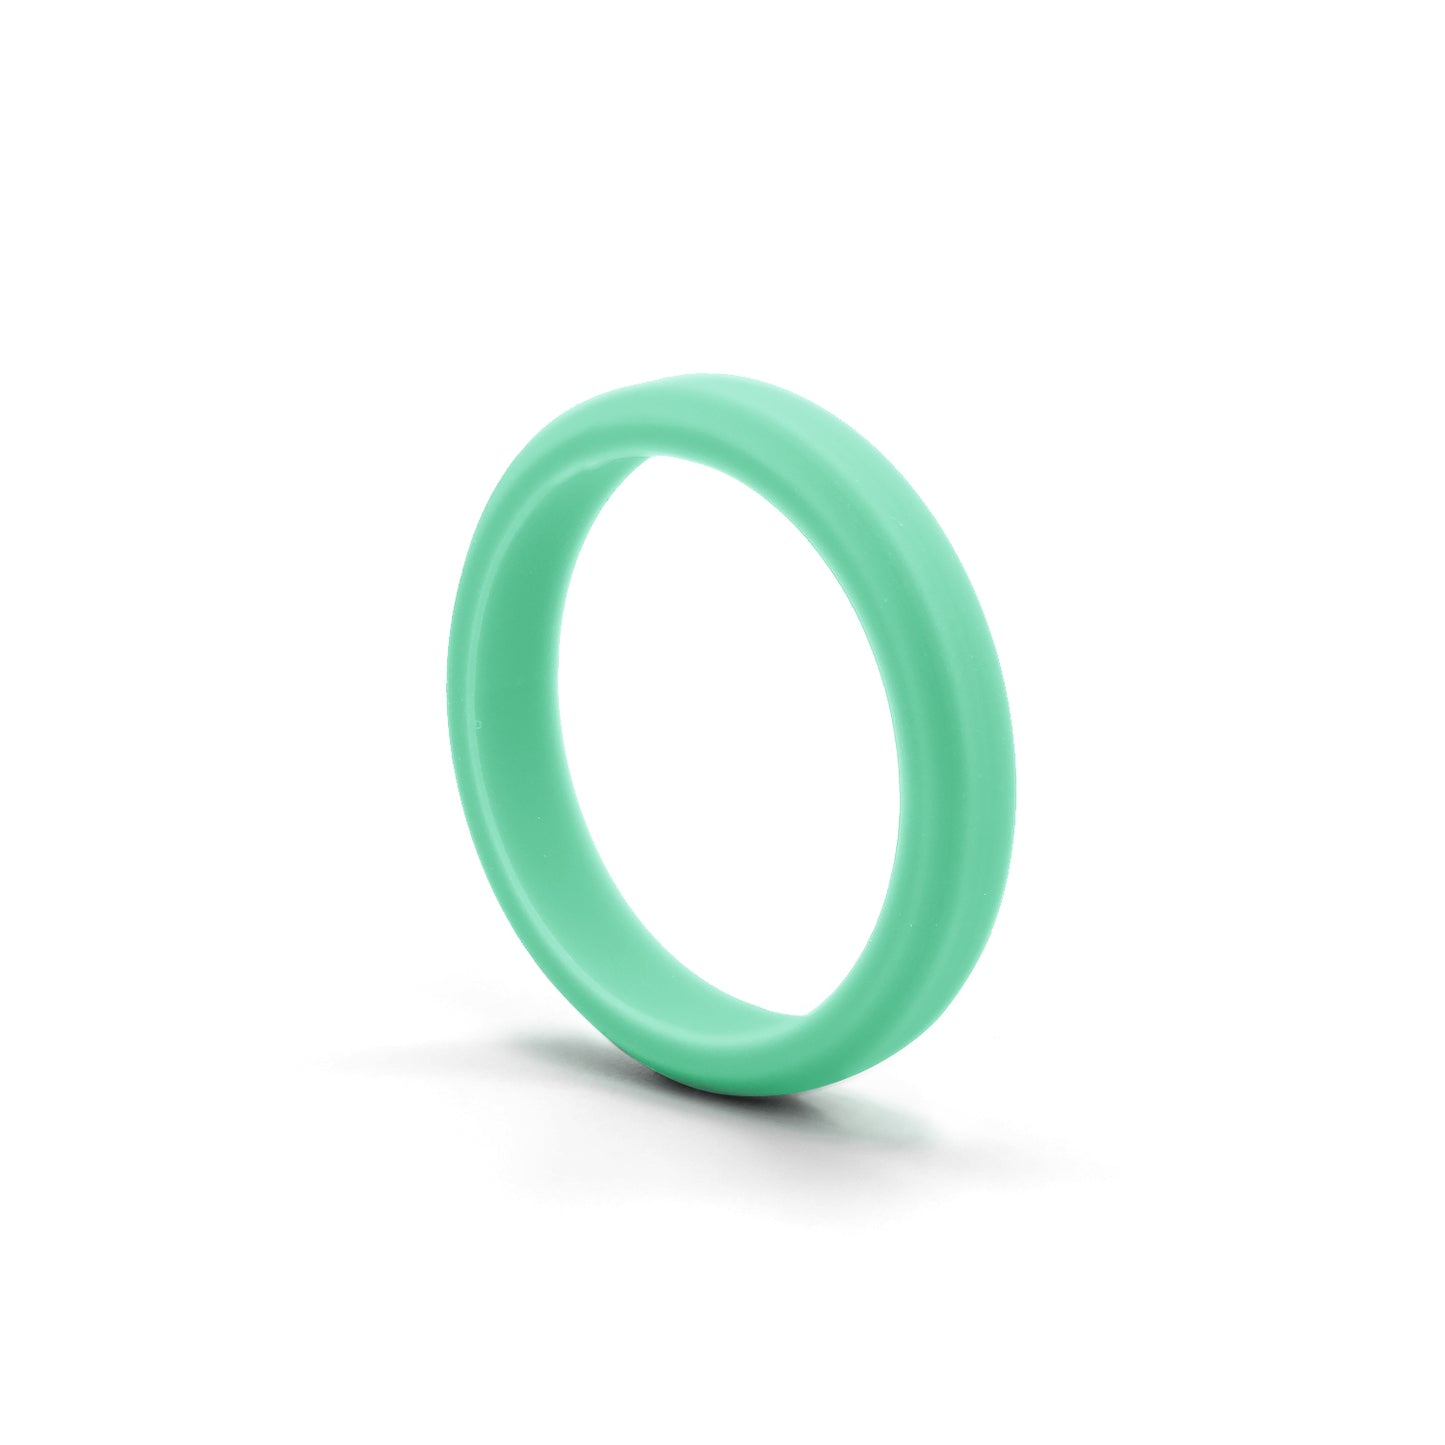 Mint Green Bevel Silicone Rubber Rings For Women